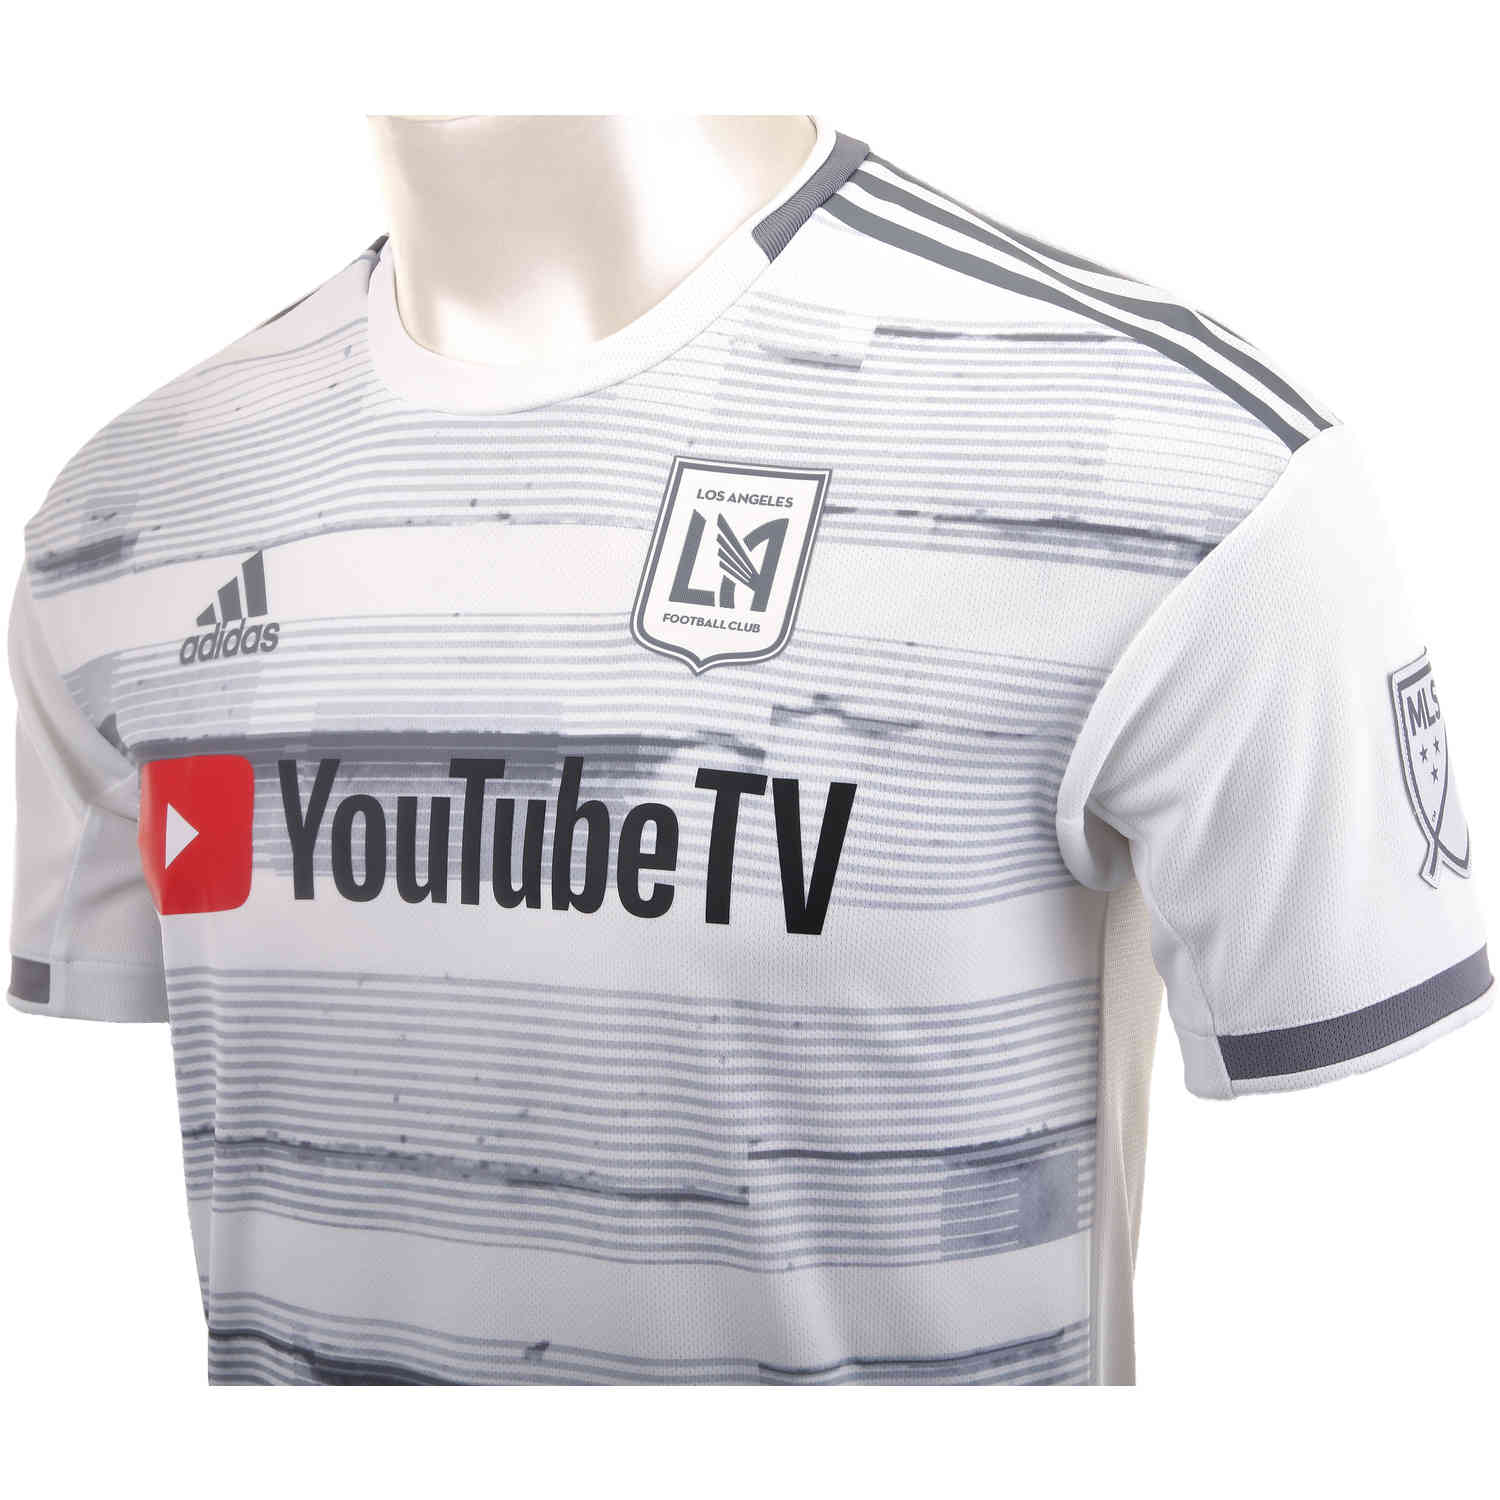 Adidas LAFC Away Authentic Jersey White 2019 - Grey